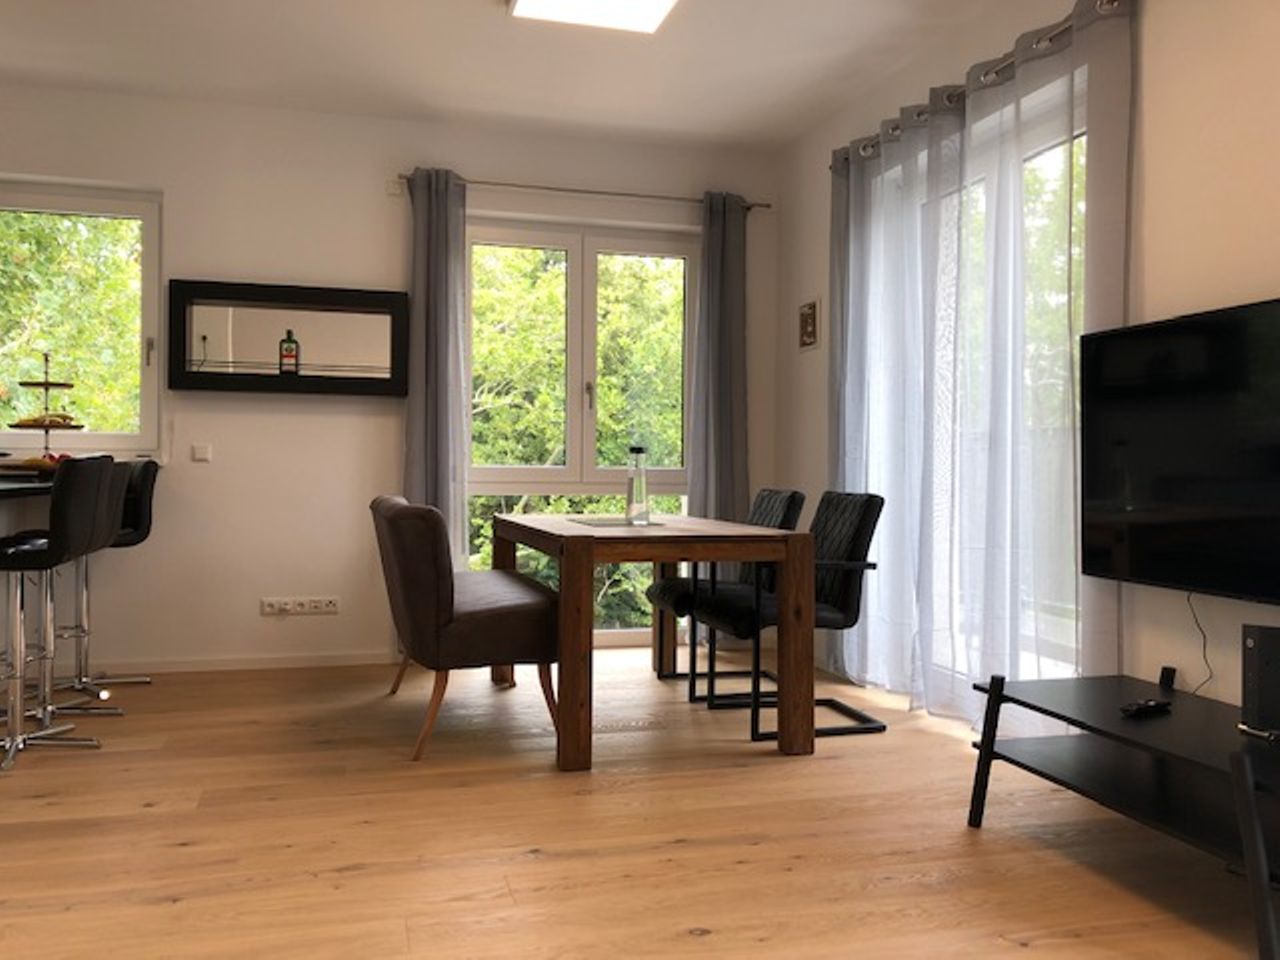 New fully furnished luxurious apartment in the very nice area Berlin-Wilhelmsruh